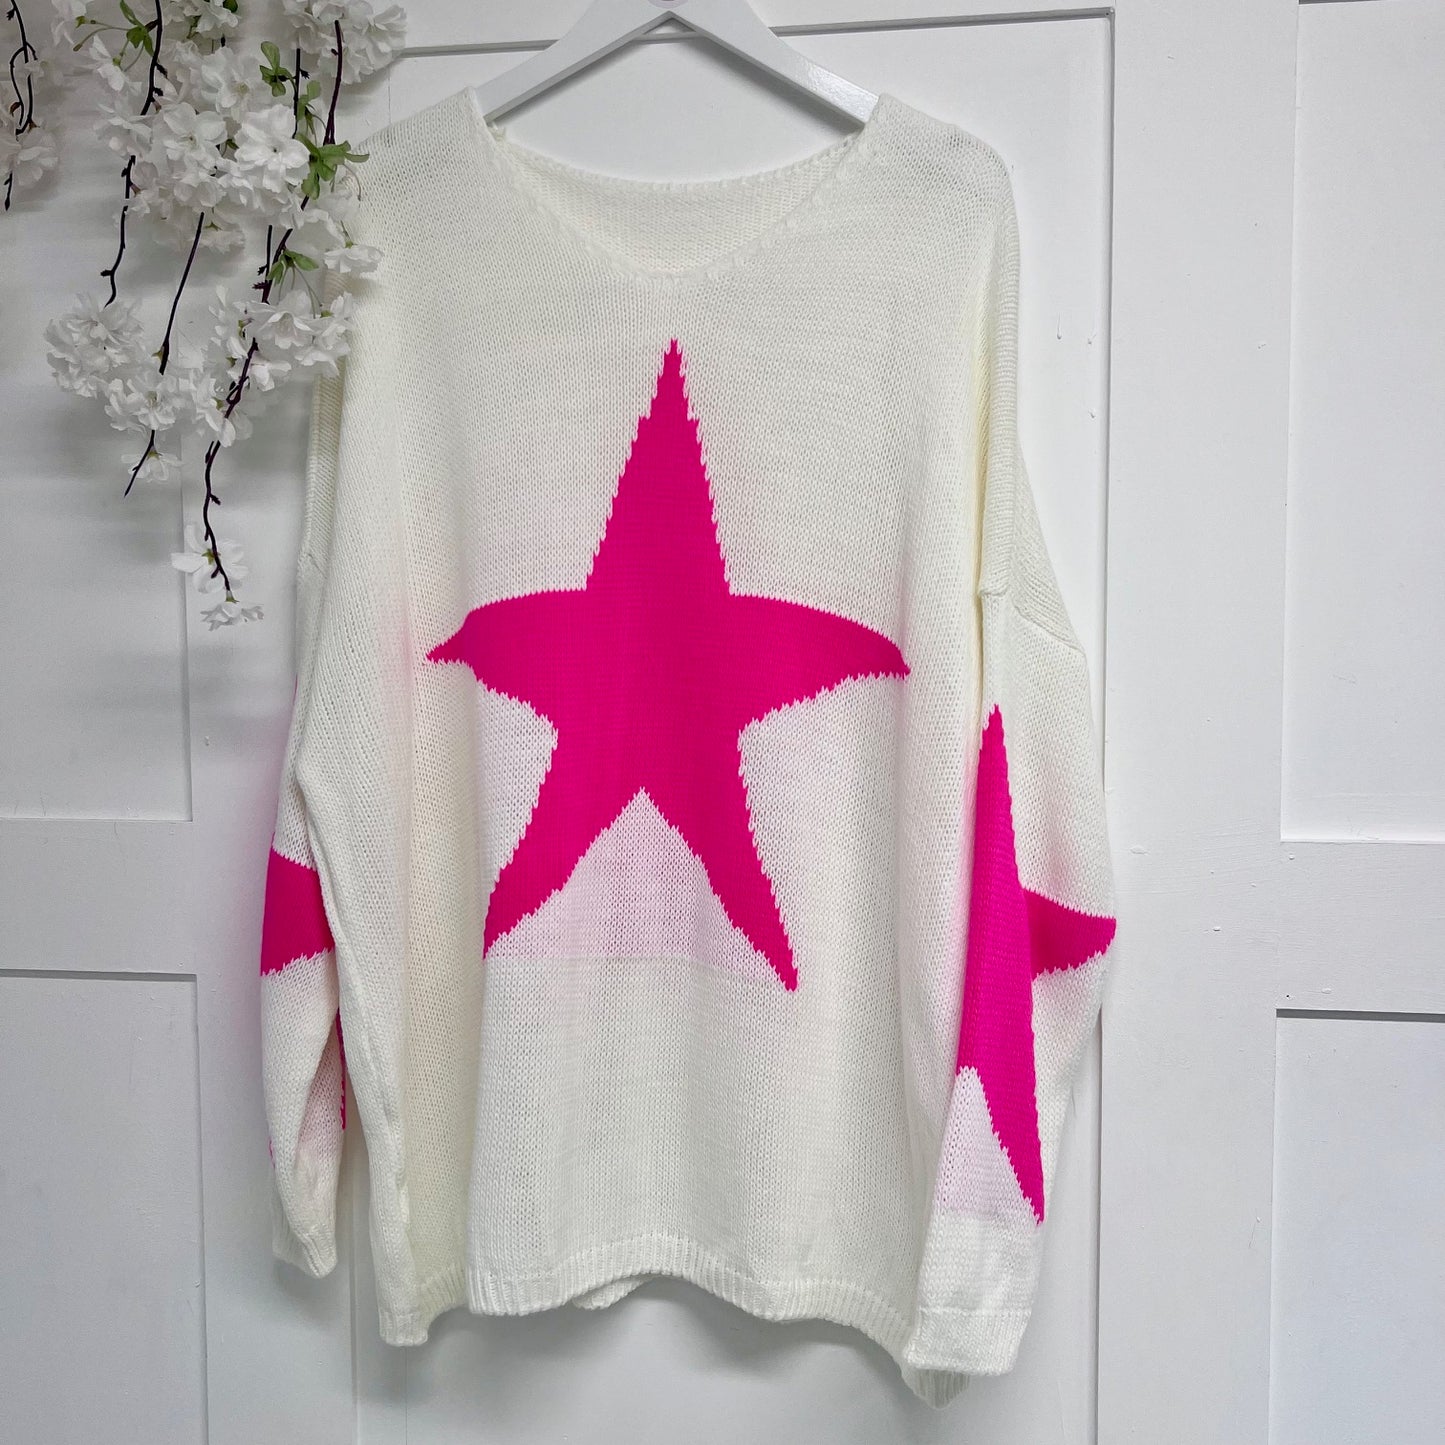 Sabrina: Oversized slouchy star jumper. One size 16-24